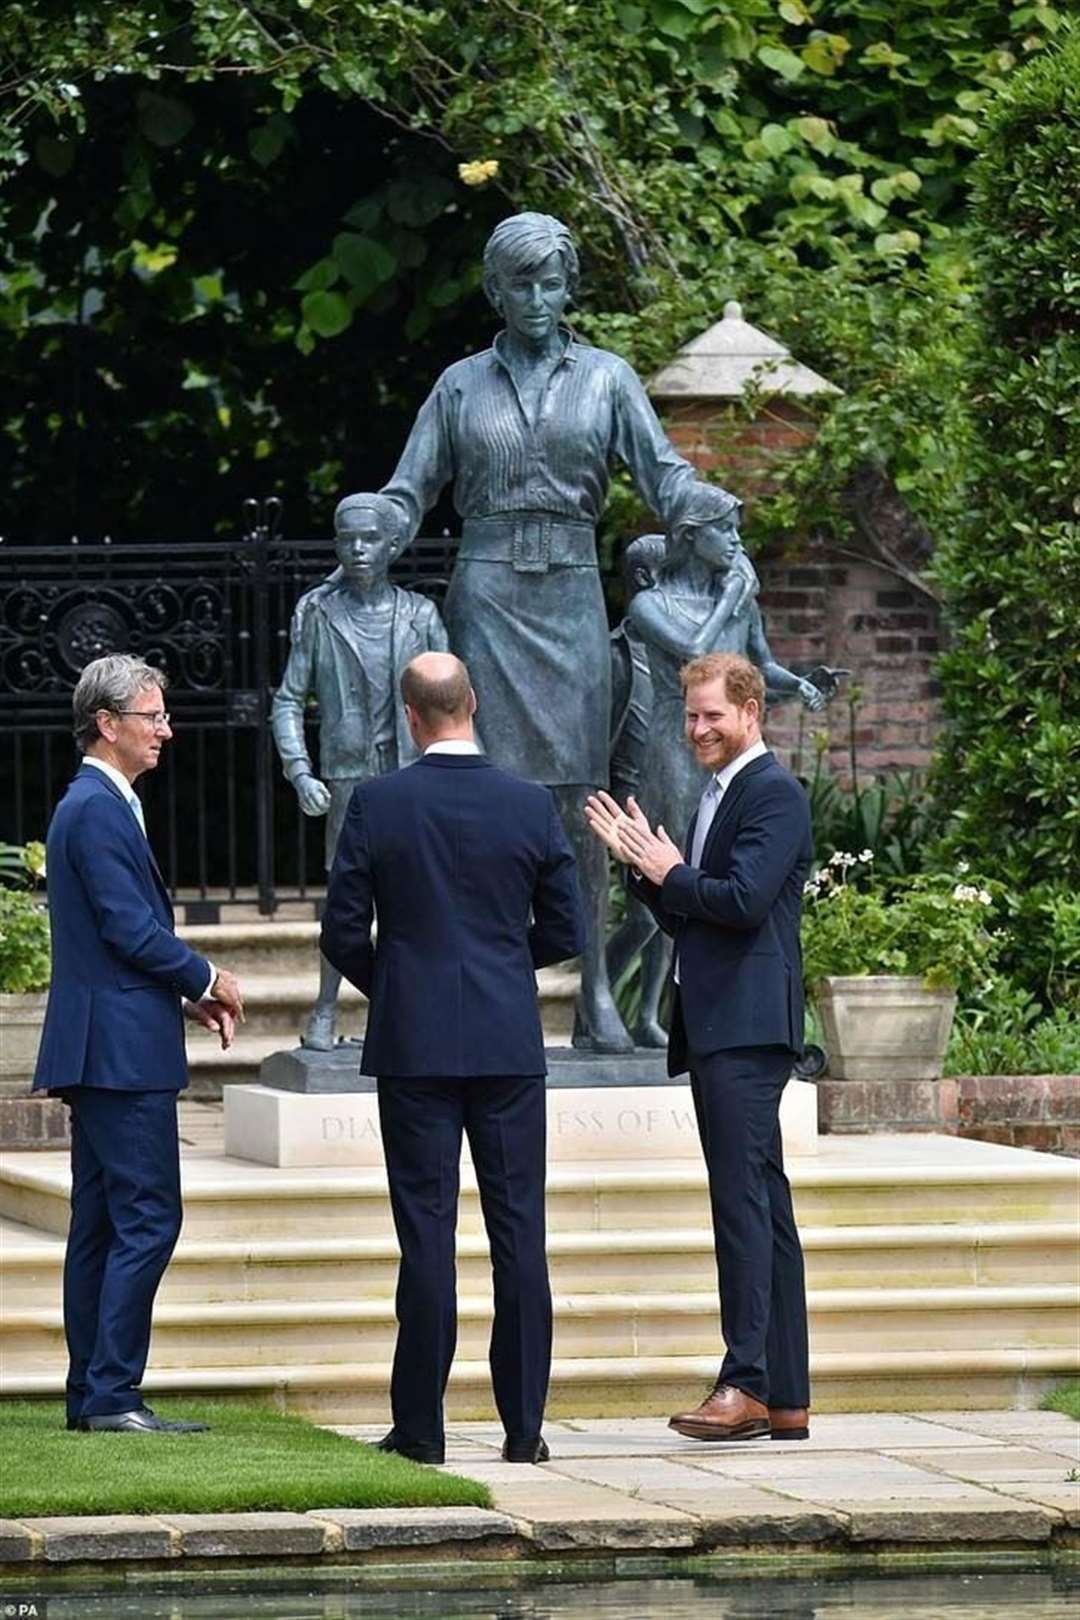 The Princess Diana statue was unveiled today. Photo from Chilstone